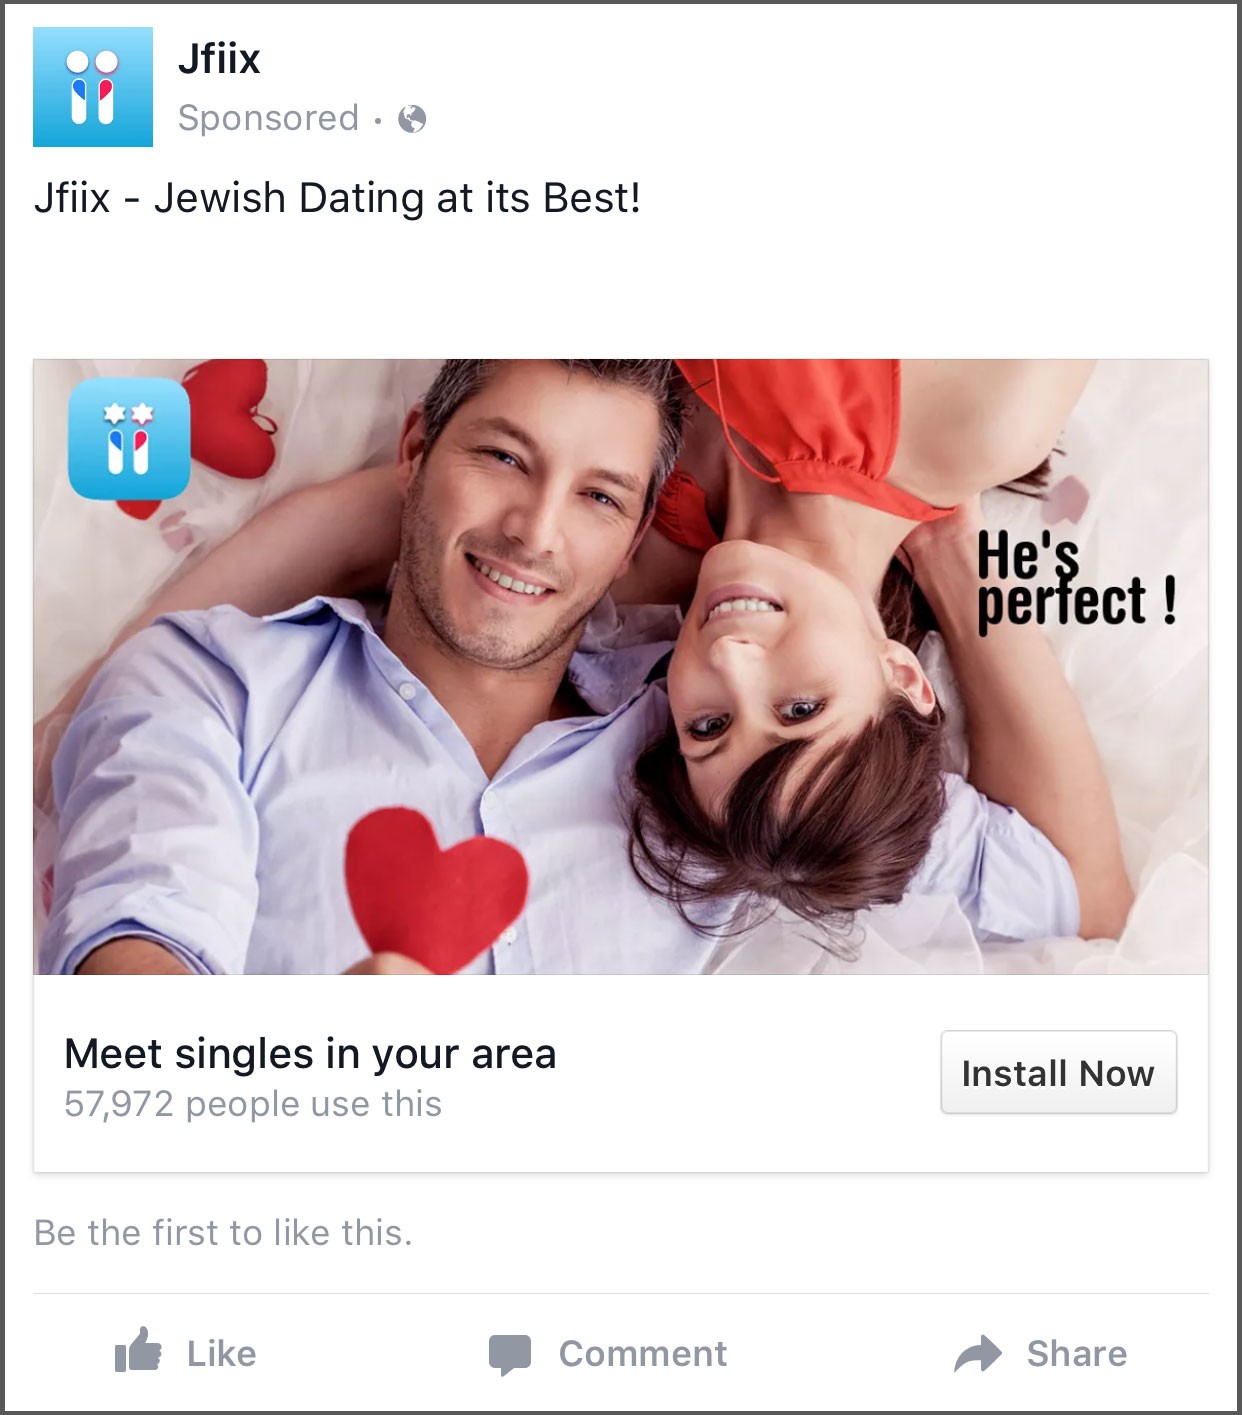 Marketing a Dating Website? Pro Tips and Tricks